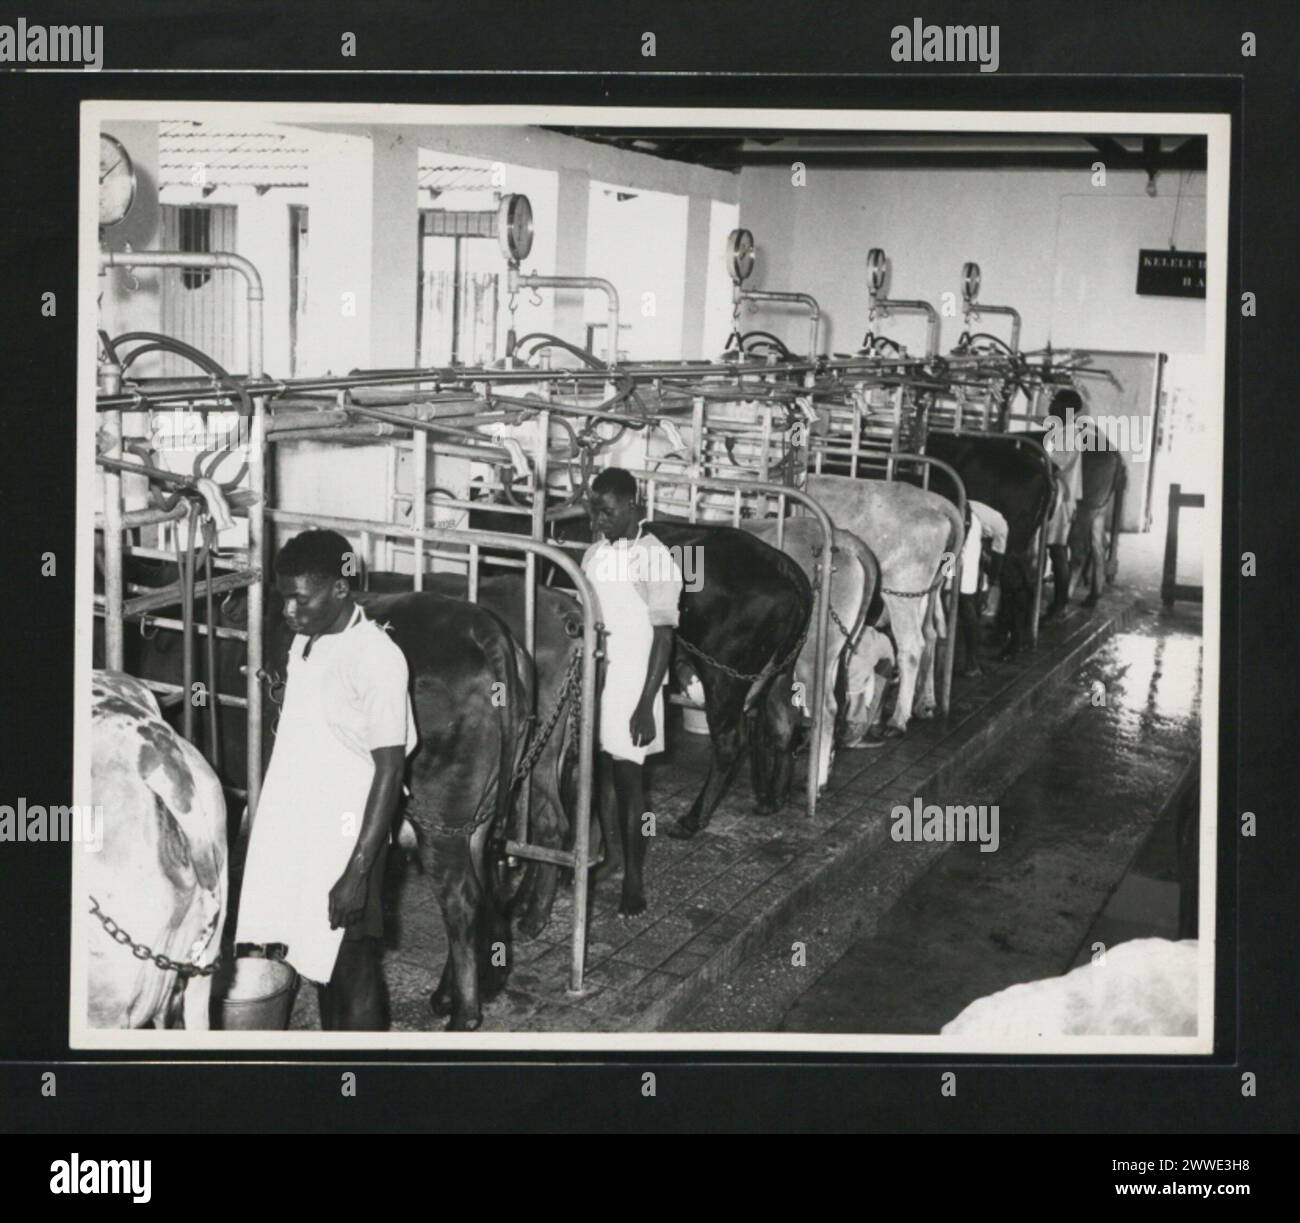 Description: Tanga Government Dairy uses latest automatic milking machine which not only saves time but is very hygienic - Tanga Province. Location: Tanga Province, Tanganyika Date: 1960 africa Stock Photo